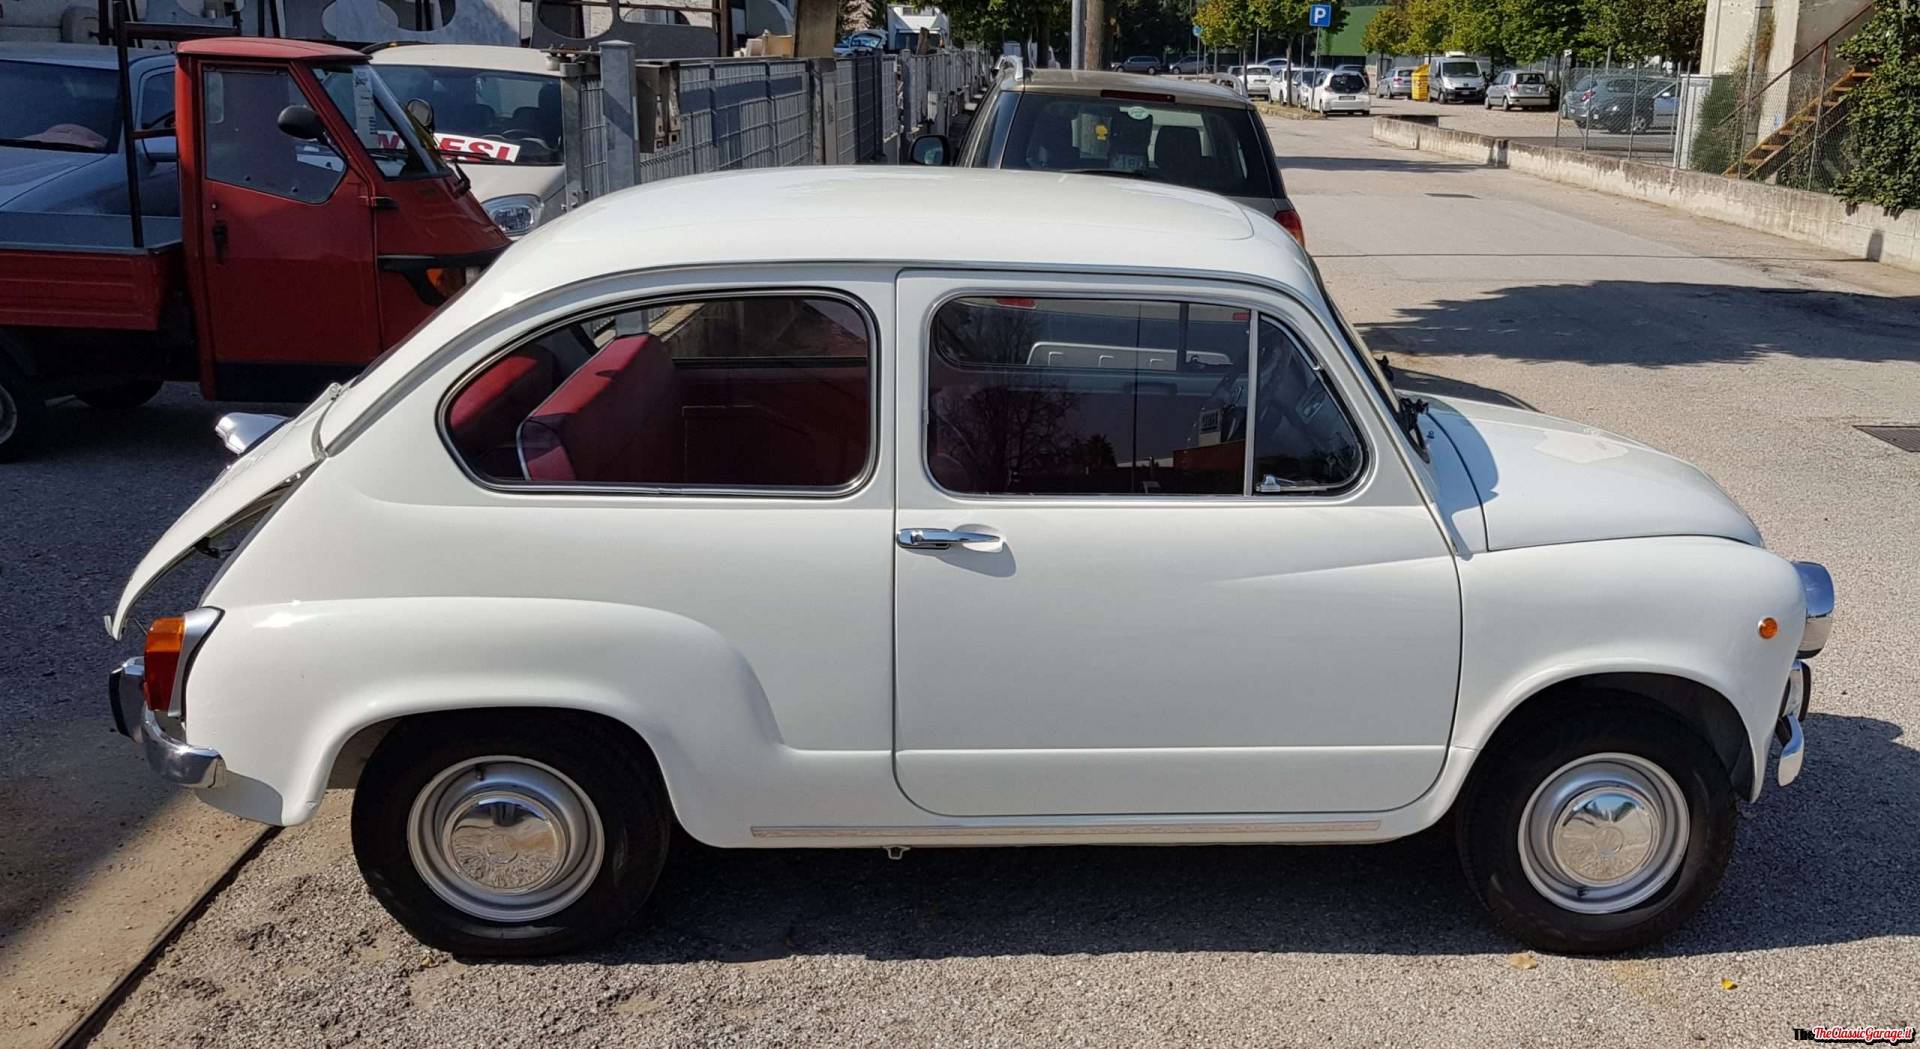 For Sale: FIAT 600 D (1968) offered for €7,900